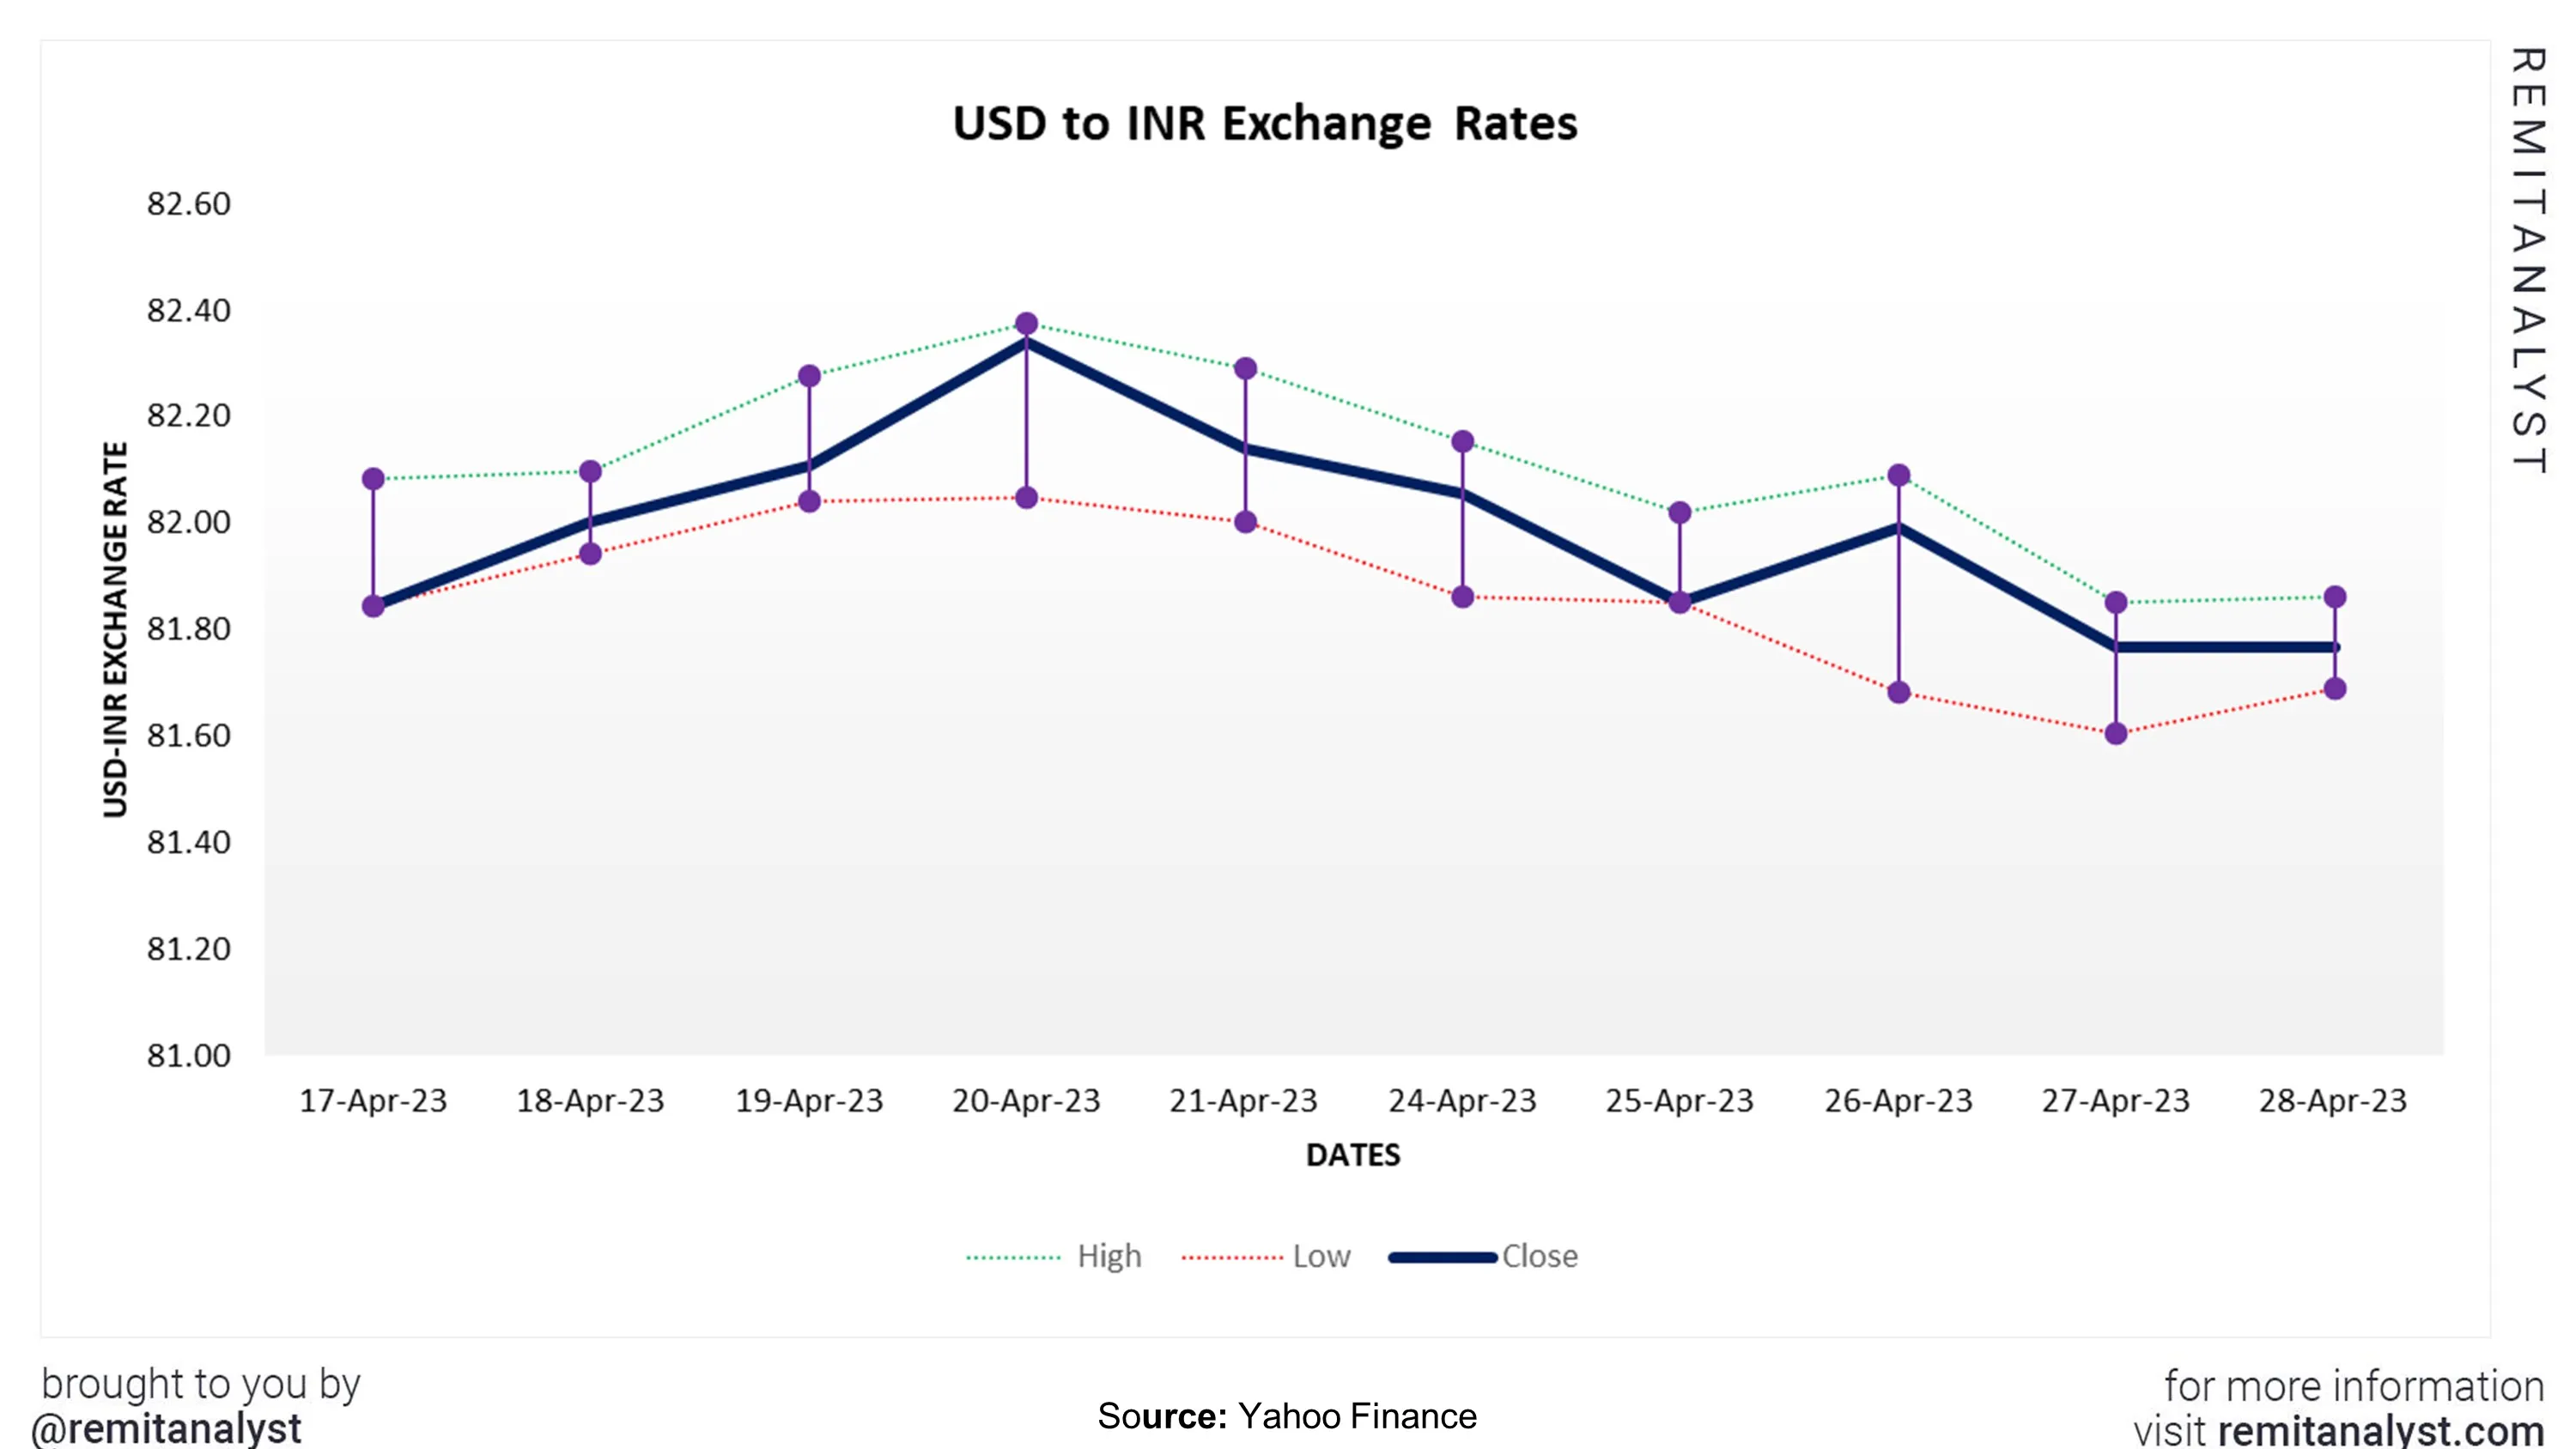 usd-to-inr-exchange-rate-from-17-apr-2023-to-28-apr-2023